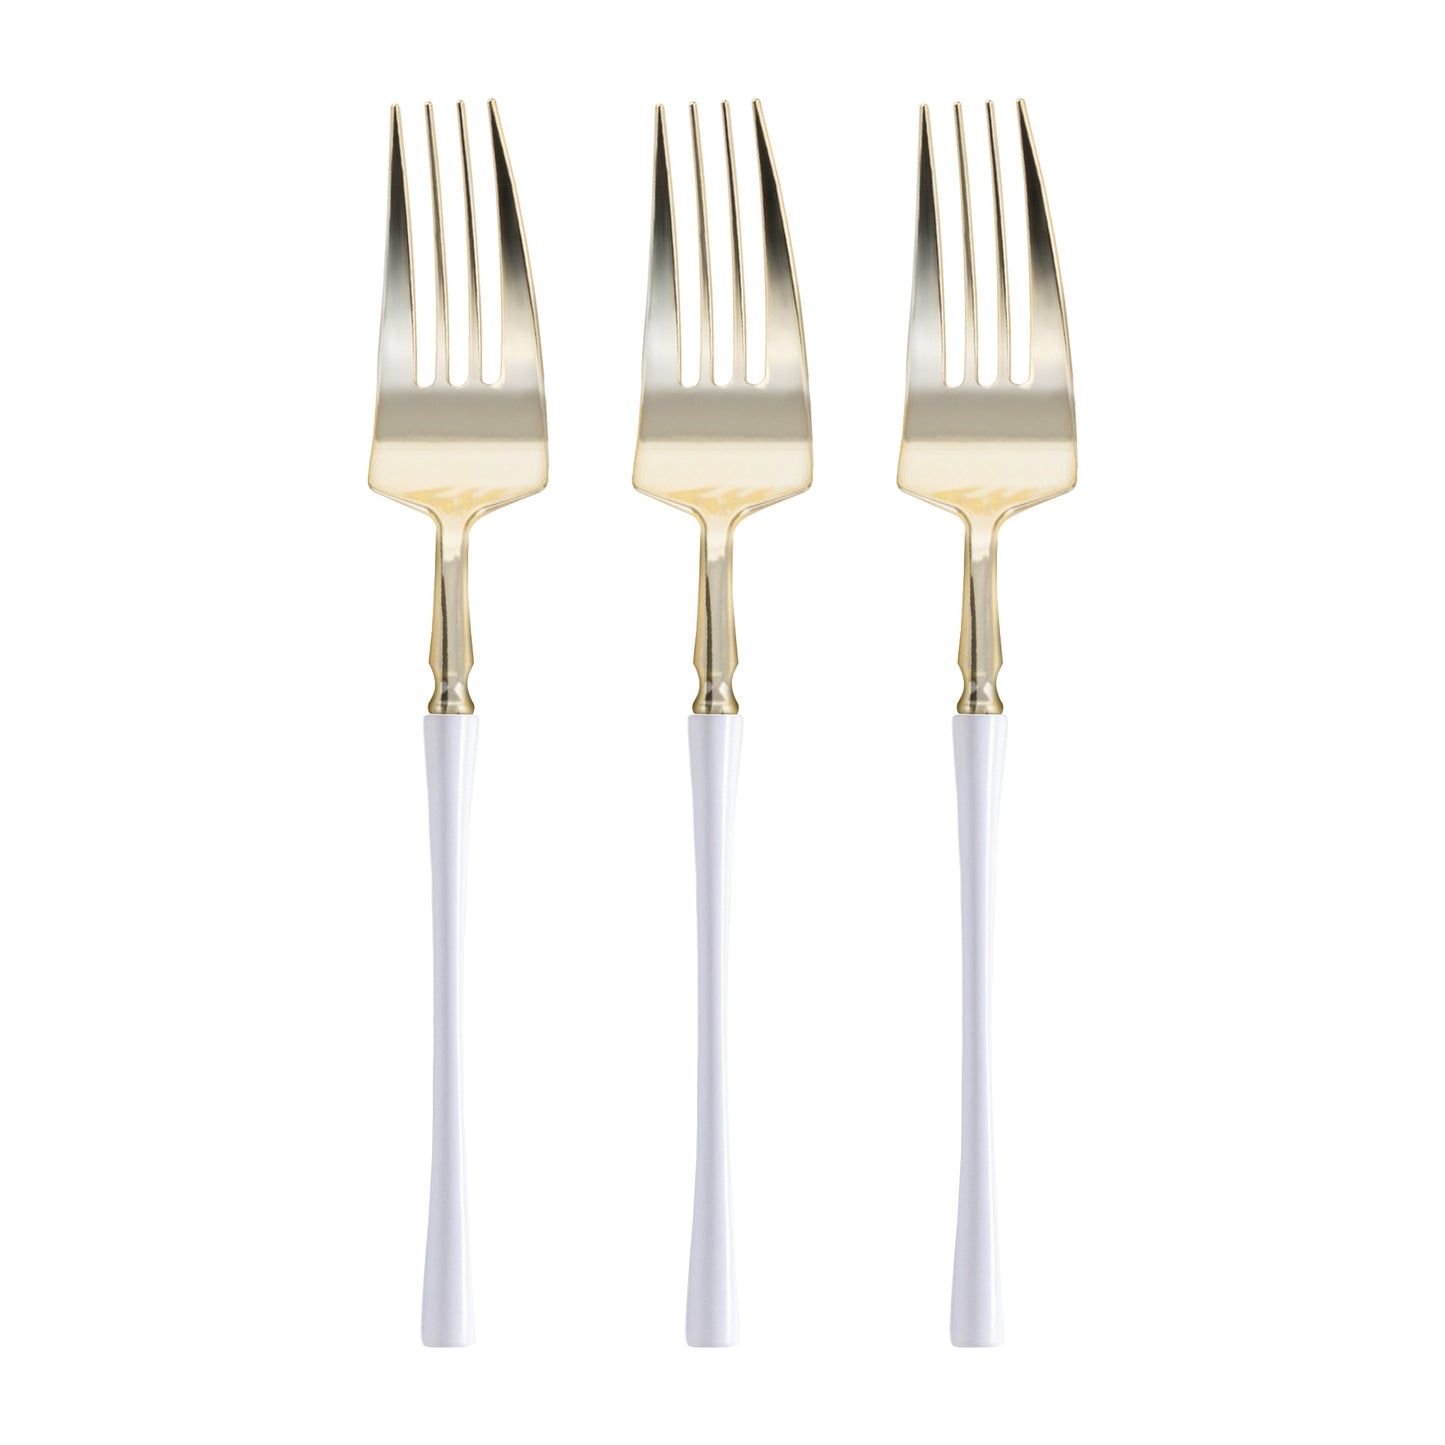 Shiny Gold with White Handle Moderno Disposable Plastic Dinner Forks